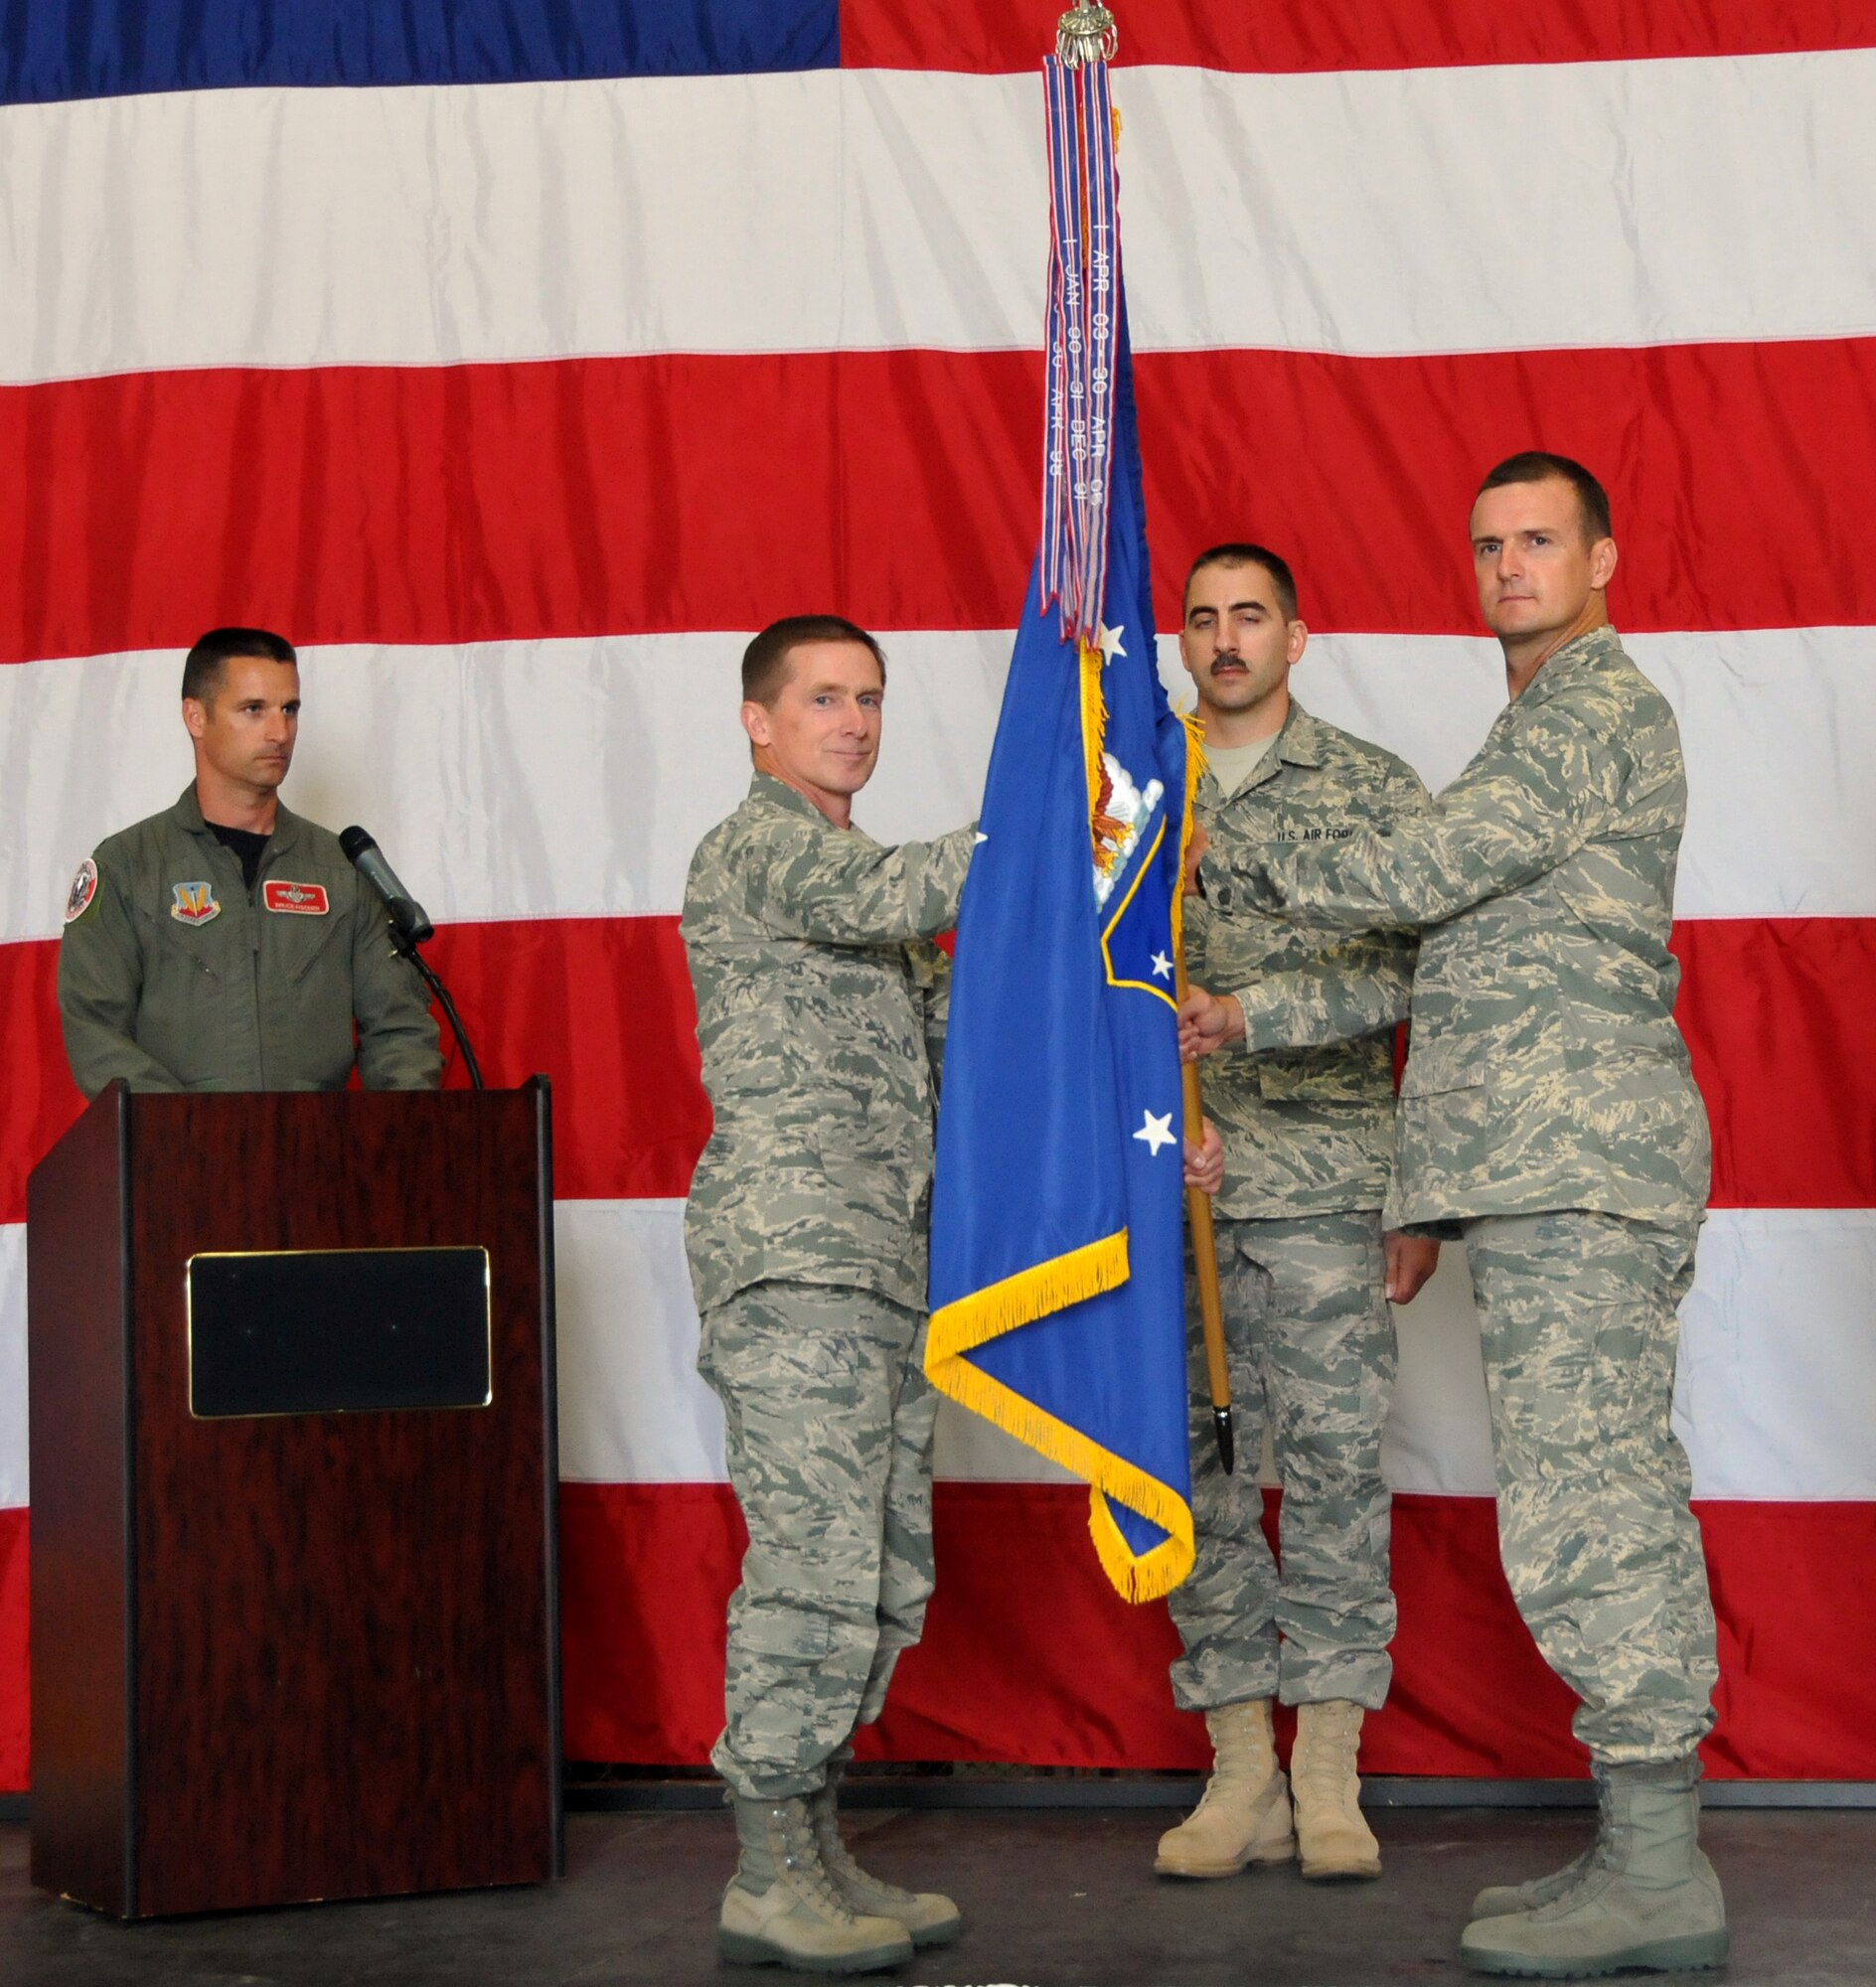 Brig. Gen. Joseph Brandemuehl, 115th Fighter Wing commander, presided over the change of command where Lt. Col. Erik Peterson assumed command of the 115th Operations Group from Col. Jeffrey Wiegand and Colonel Wiegand assumed command of the 115th Maintenance Group from Col. Patrick Volk. (U.S. Air Force photo by Tech. Sgt. Ashley Bell)